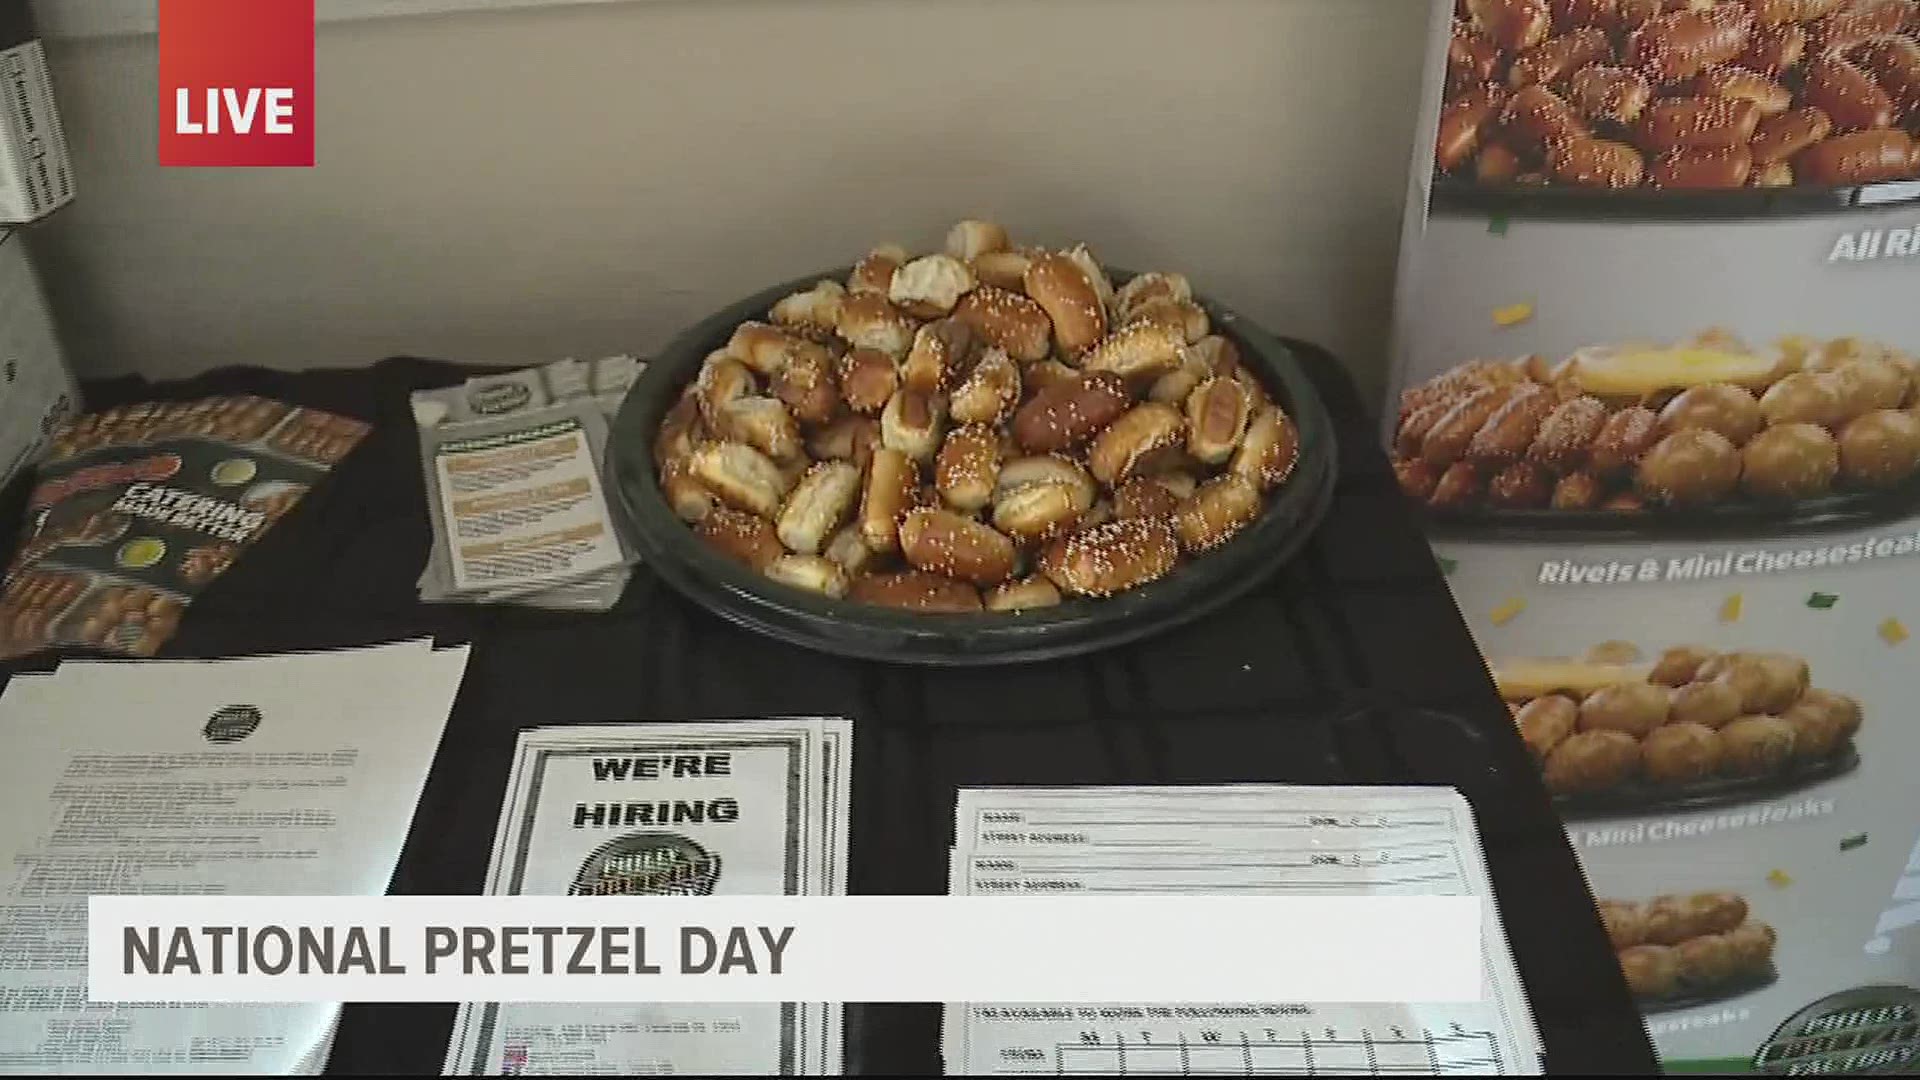 Philly Pretzel Factory is offering free pretzels to all customers for National Pretzel Day!